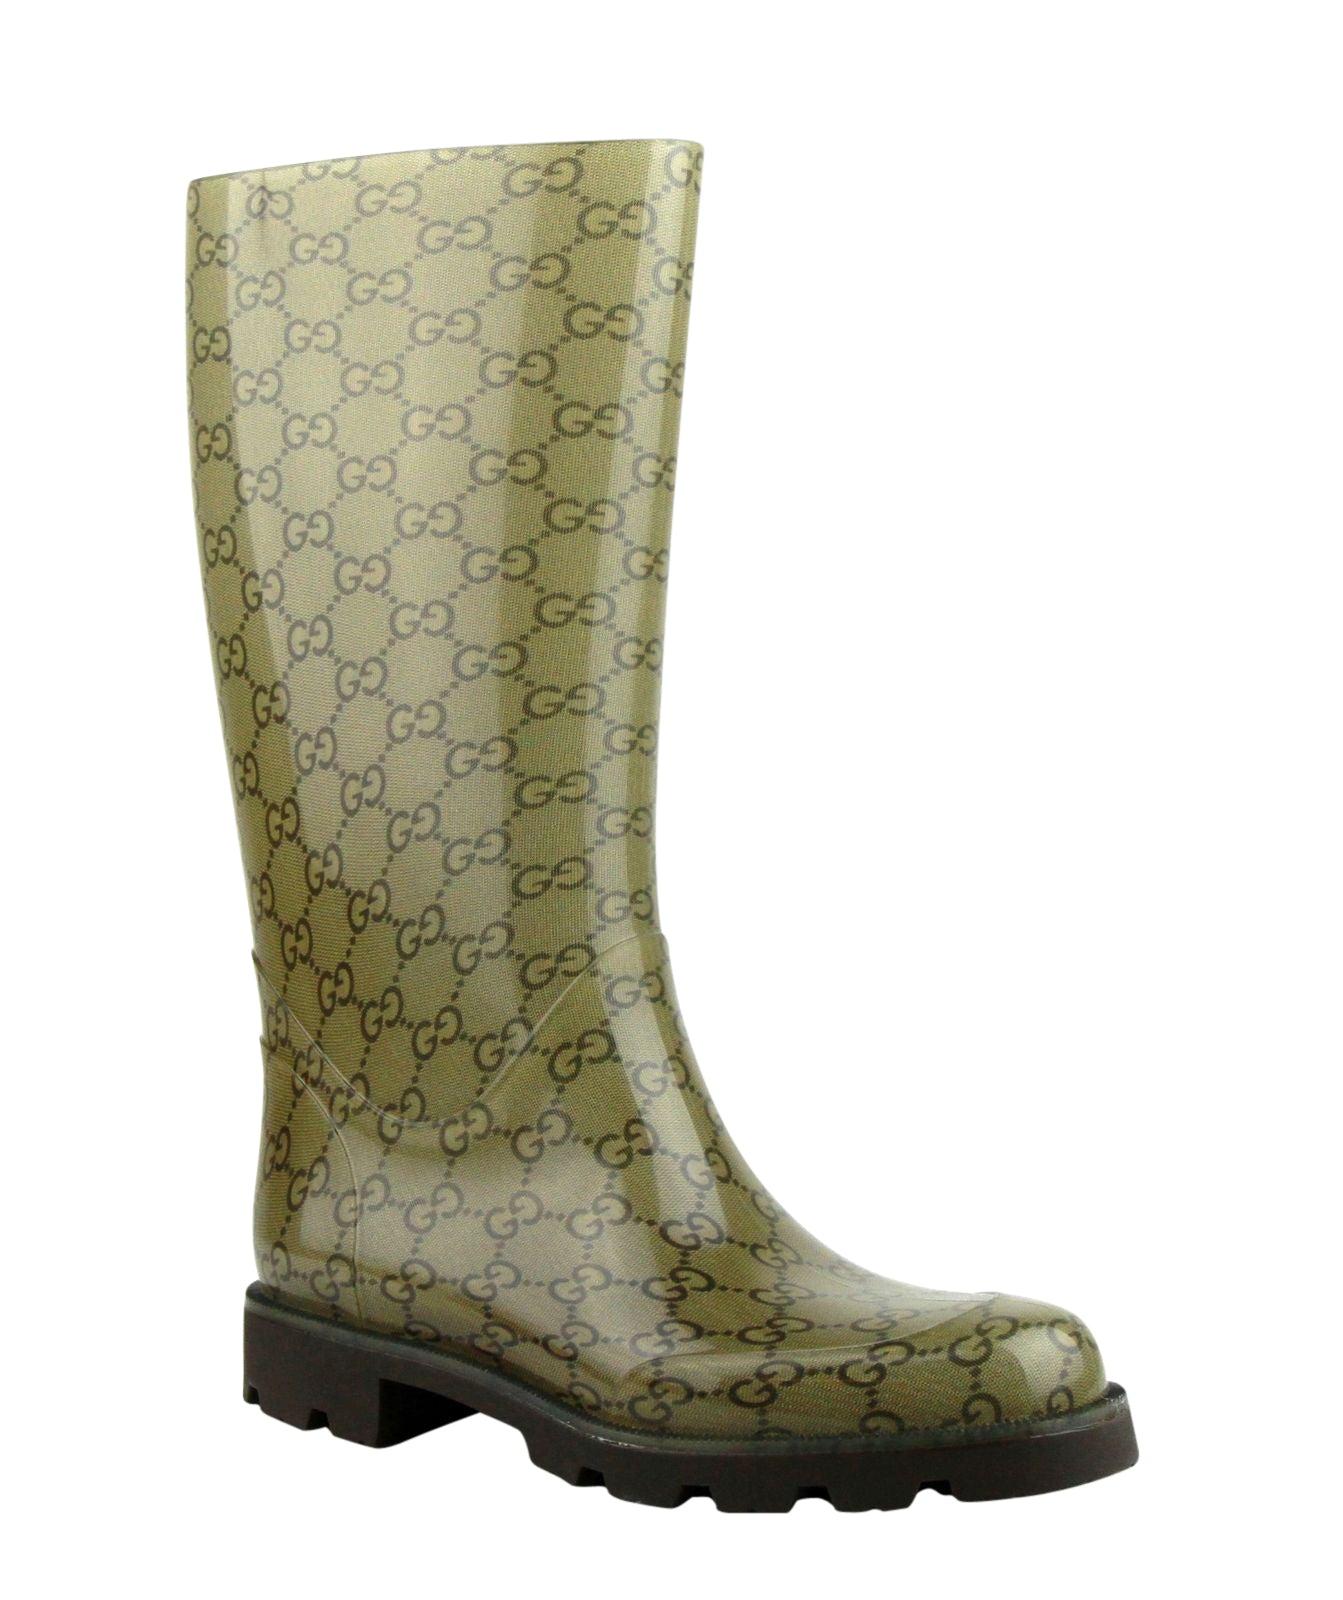 Gucci S Ssima Pattern Light Rubber Rain Boots 248516 8367 in Brown | Lyst